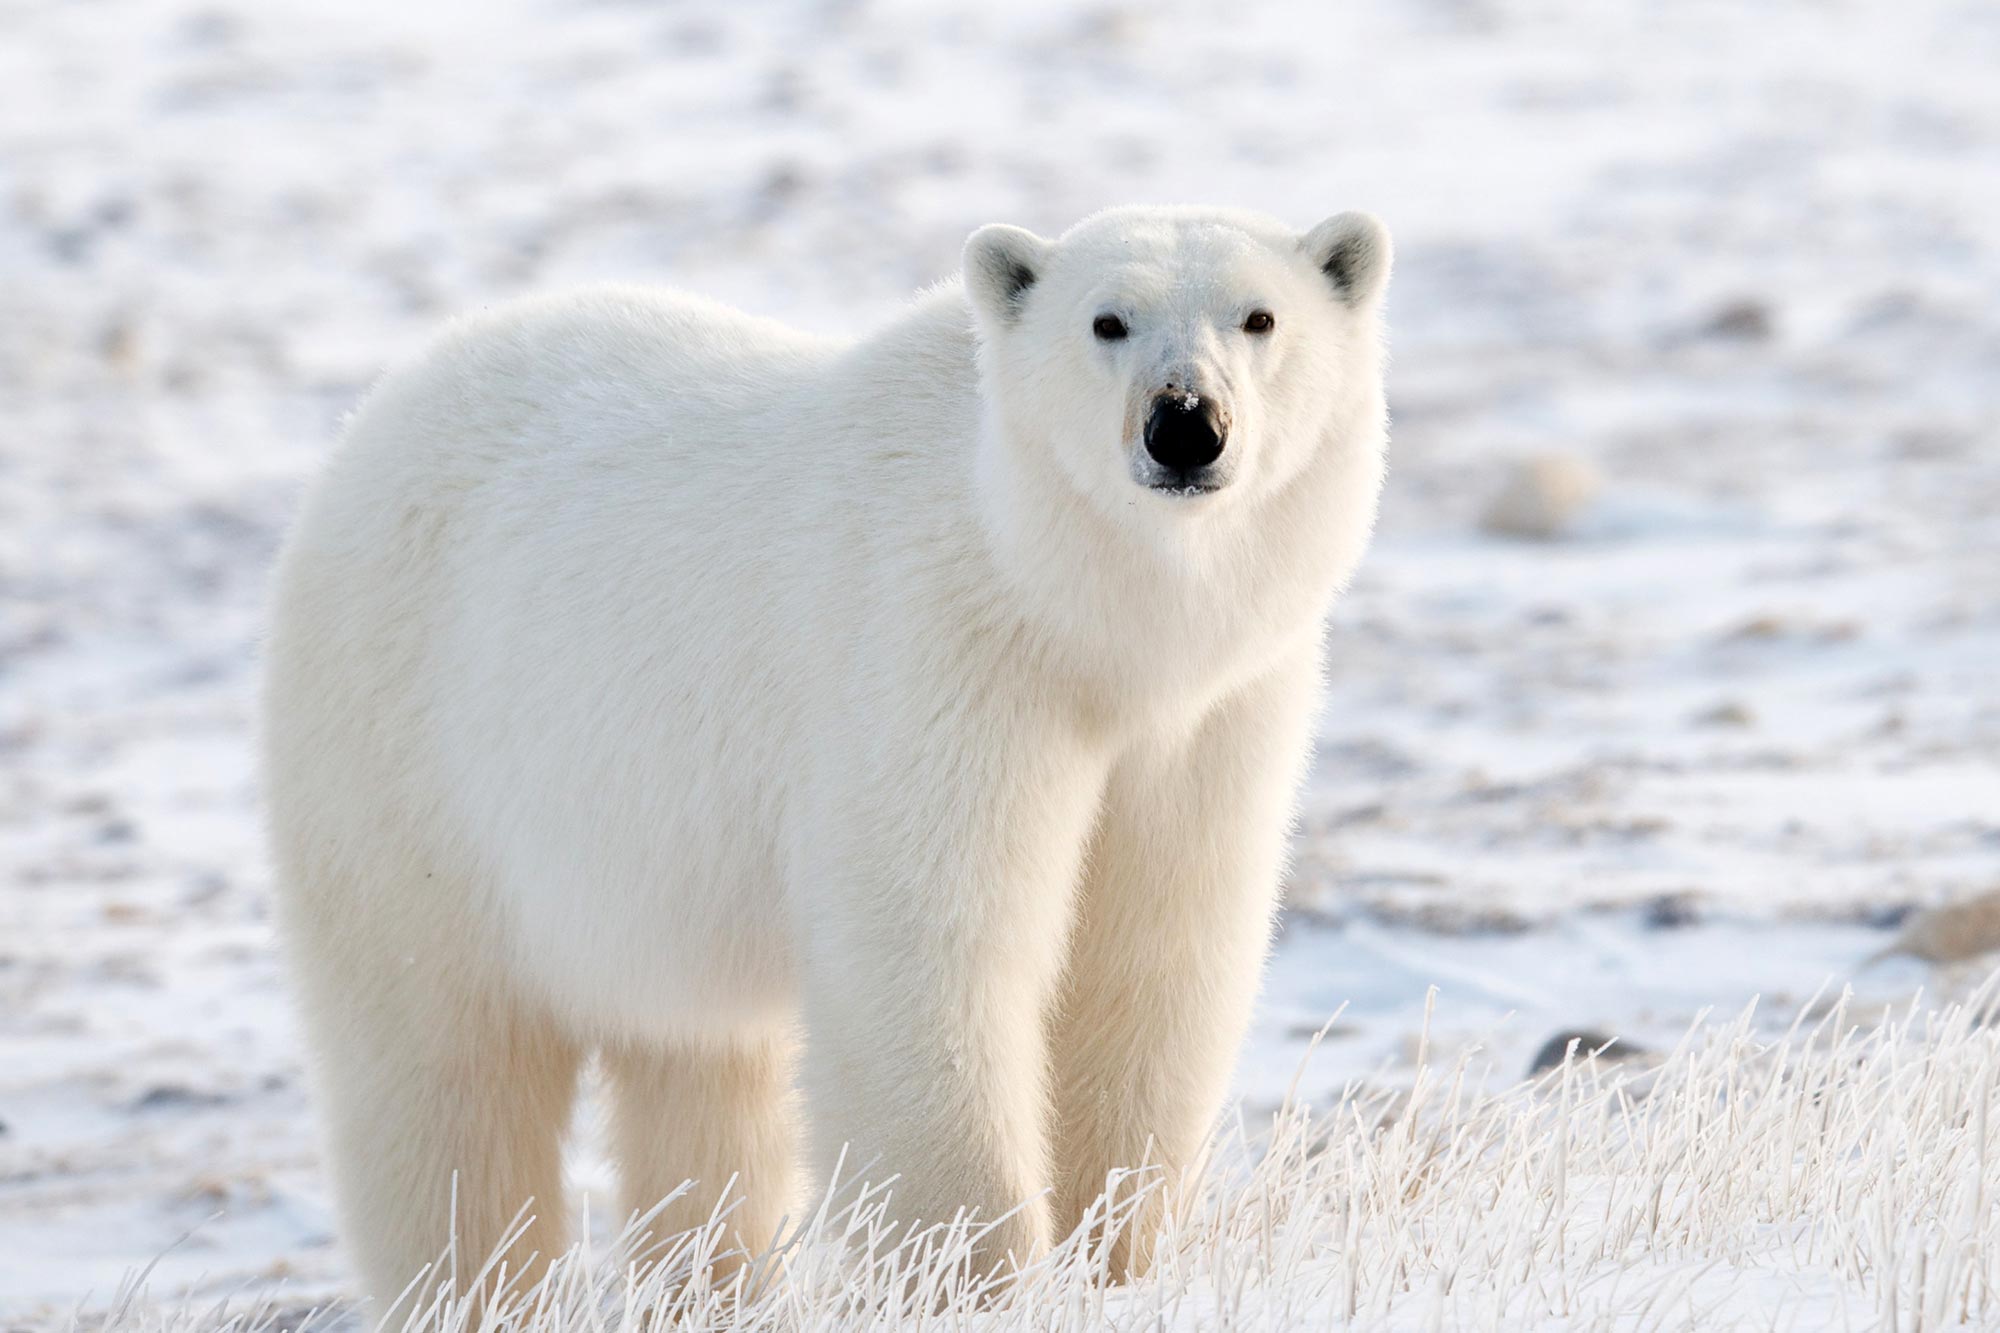 New Polar Bear-Inspired Fabric Is 30% Lighter Than Cotton and Far Warmer